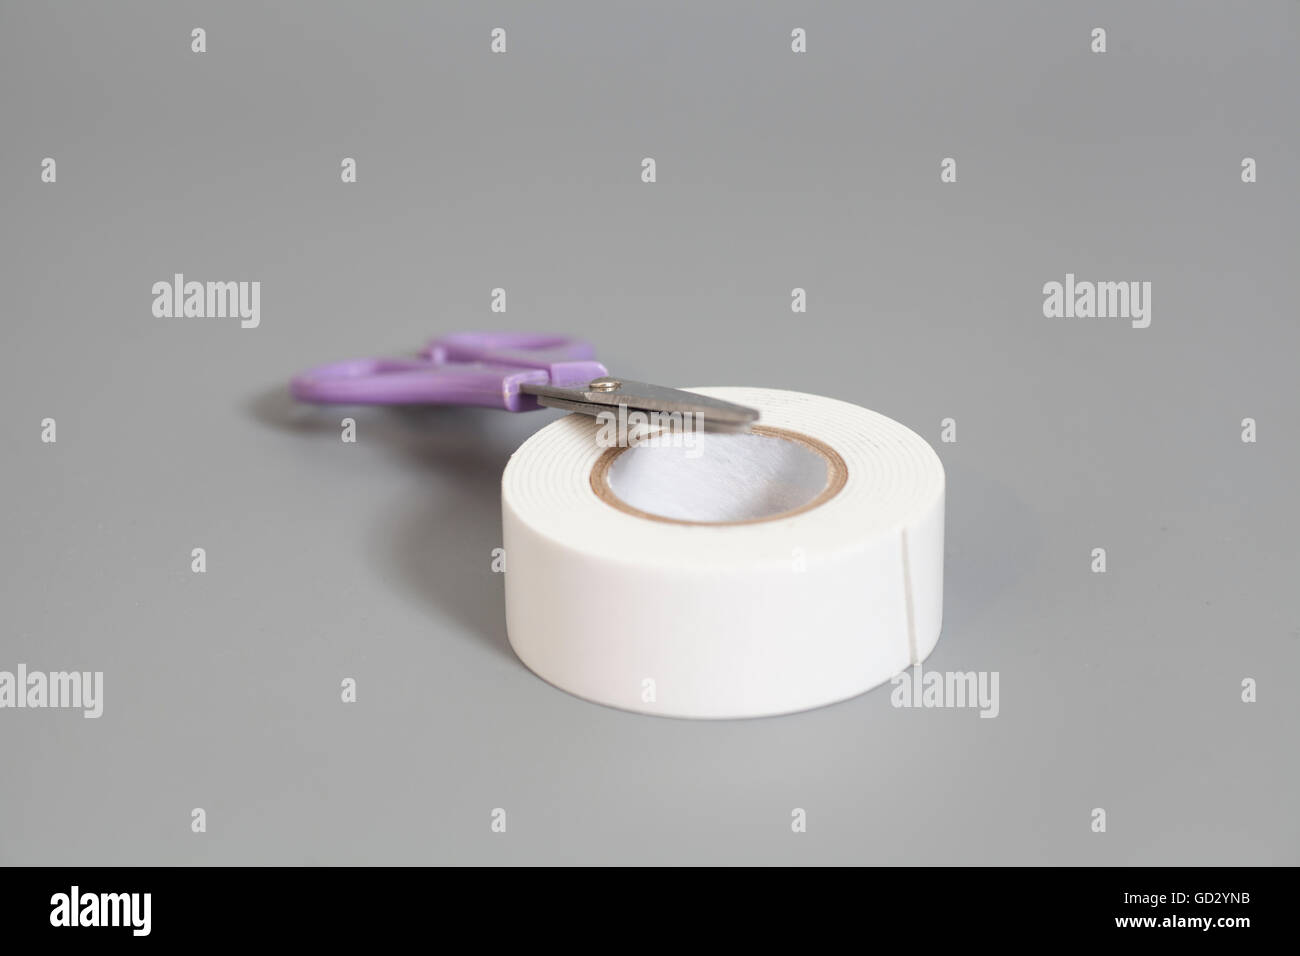 Scissors And Roll Of Duct Tape isolated on gray background Stock Photo